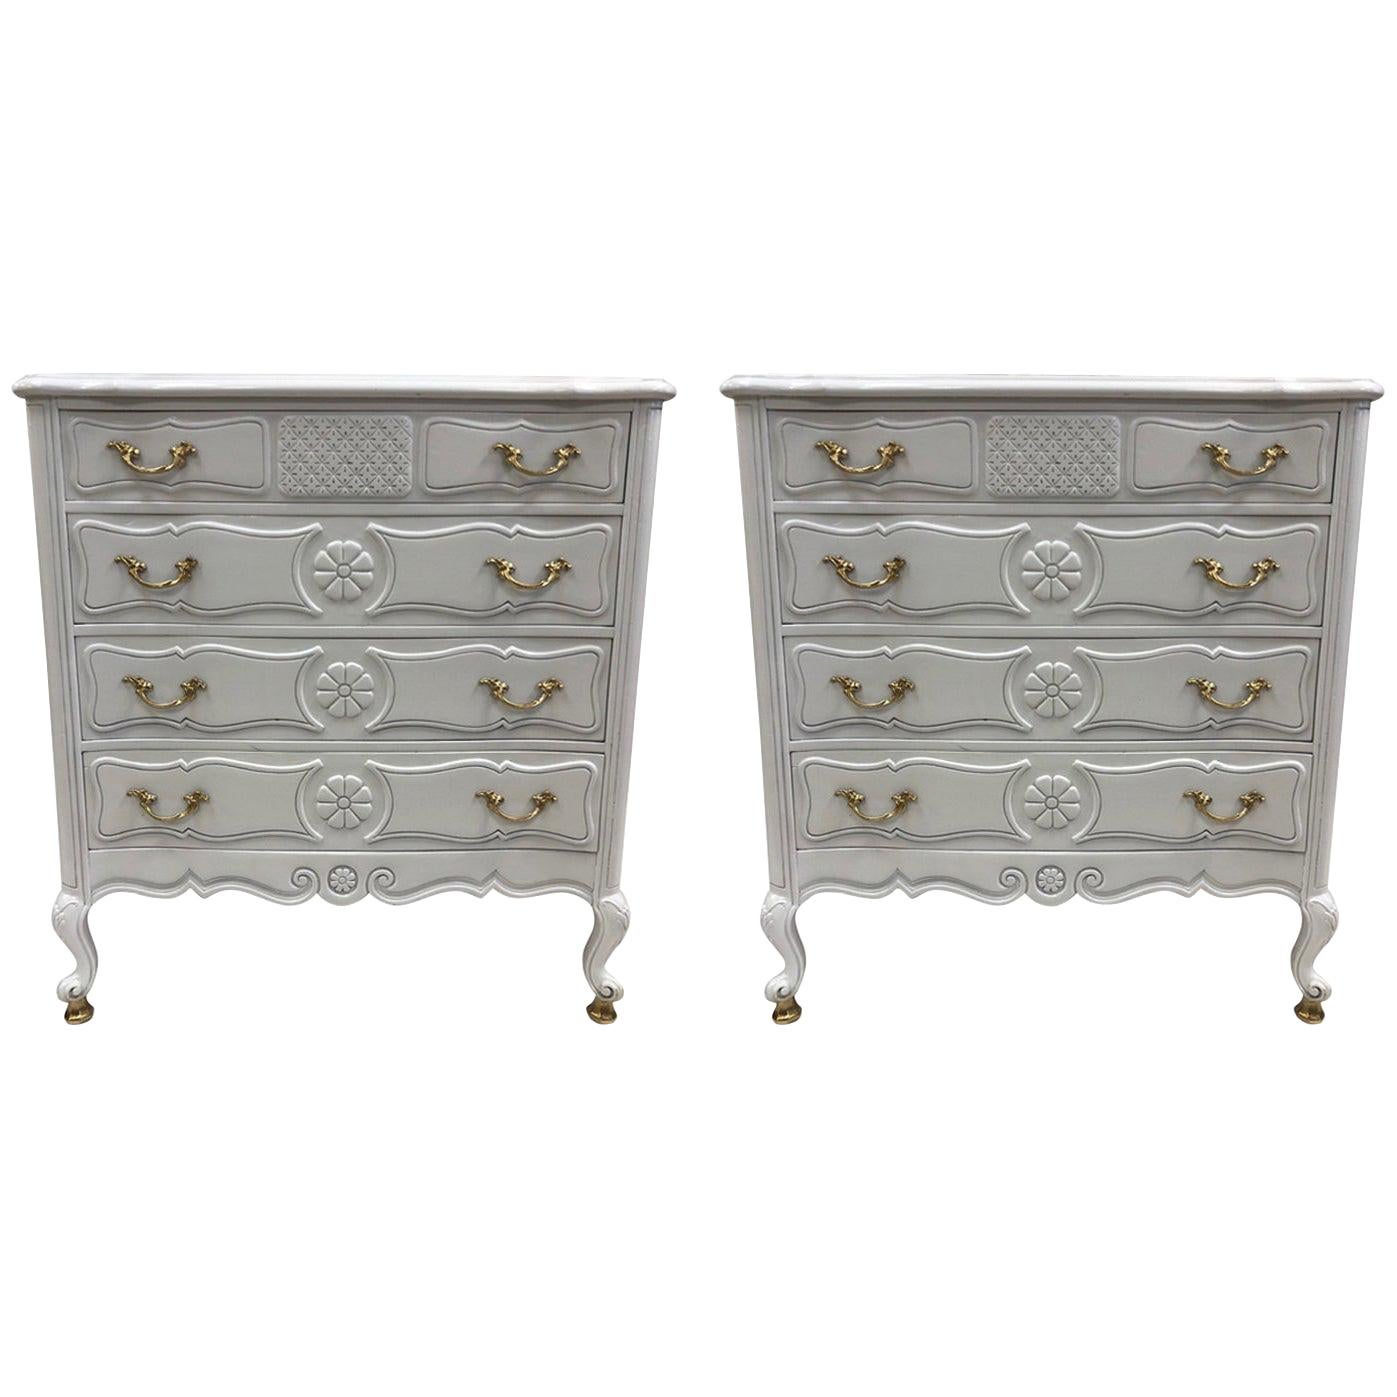 Pair of French Antique Style Marble-Top Chests For Sale